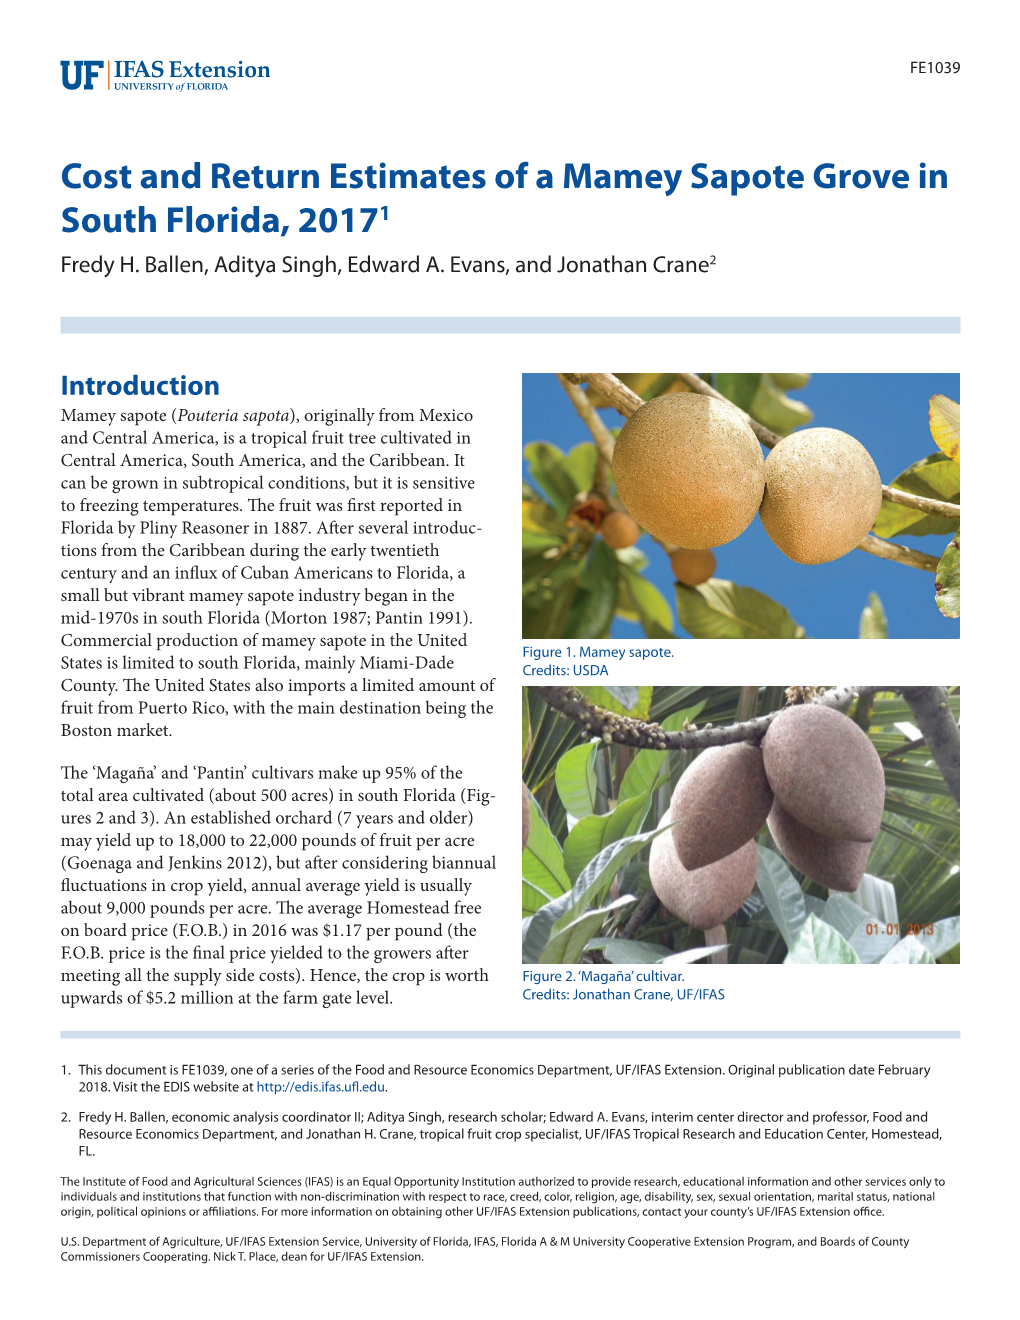 Cost and Return Estimates of a Mamey Sapote Grove in South Florida, 20171 Fredy H